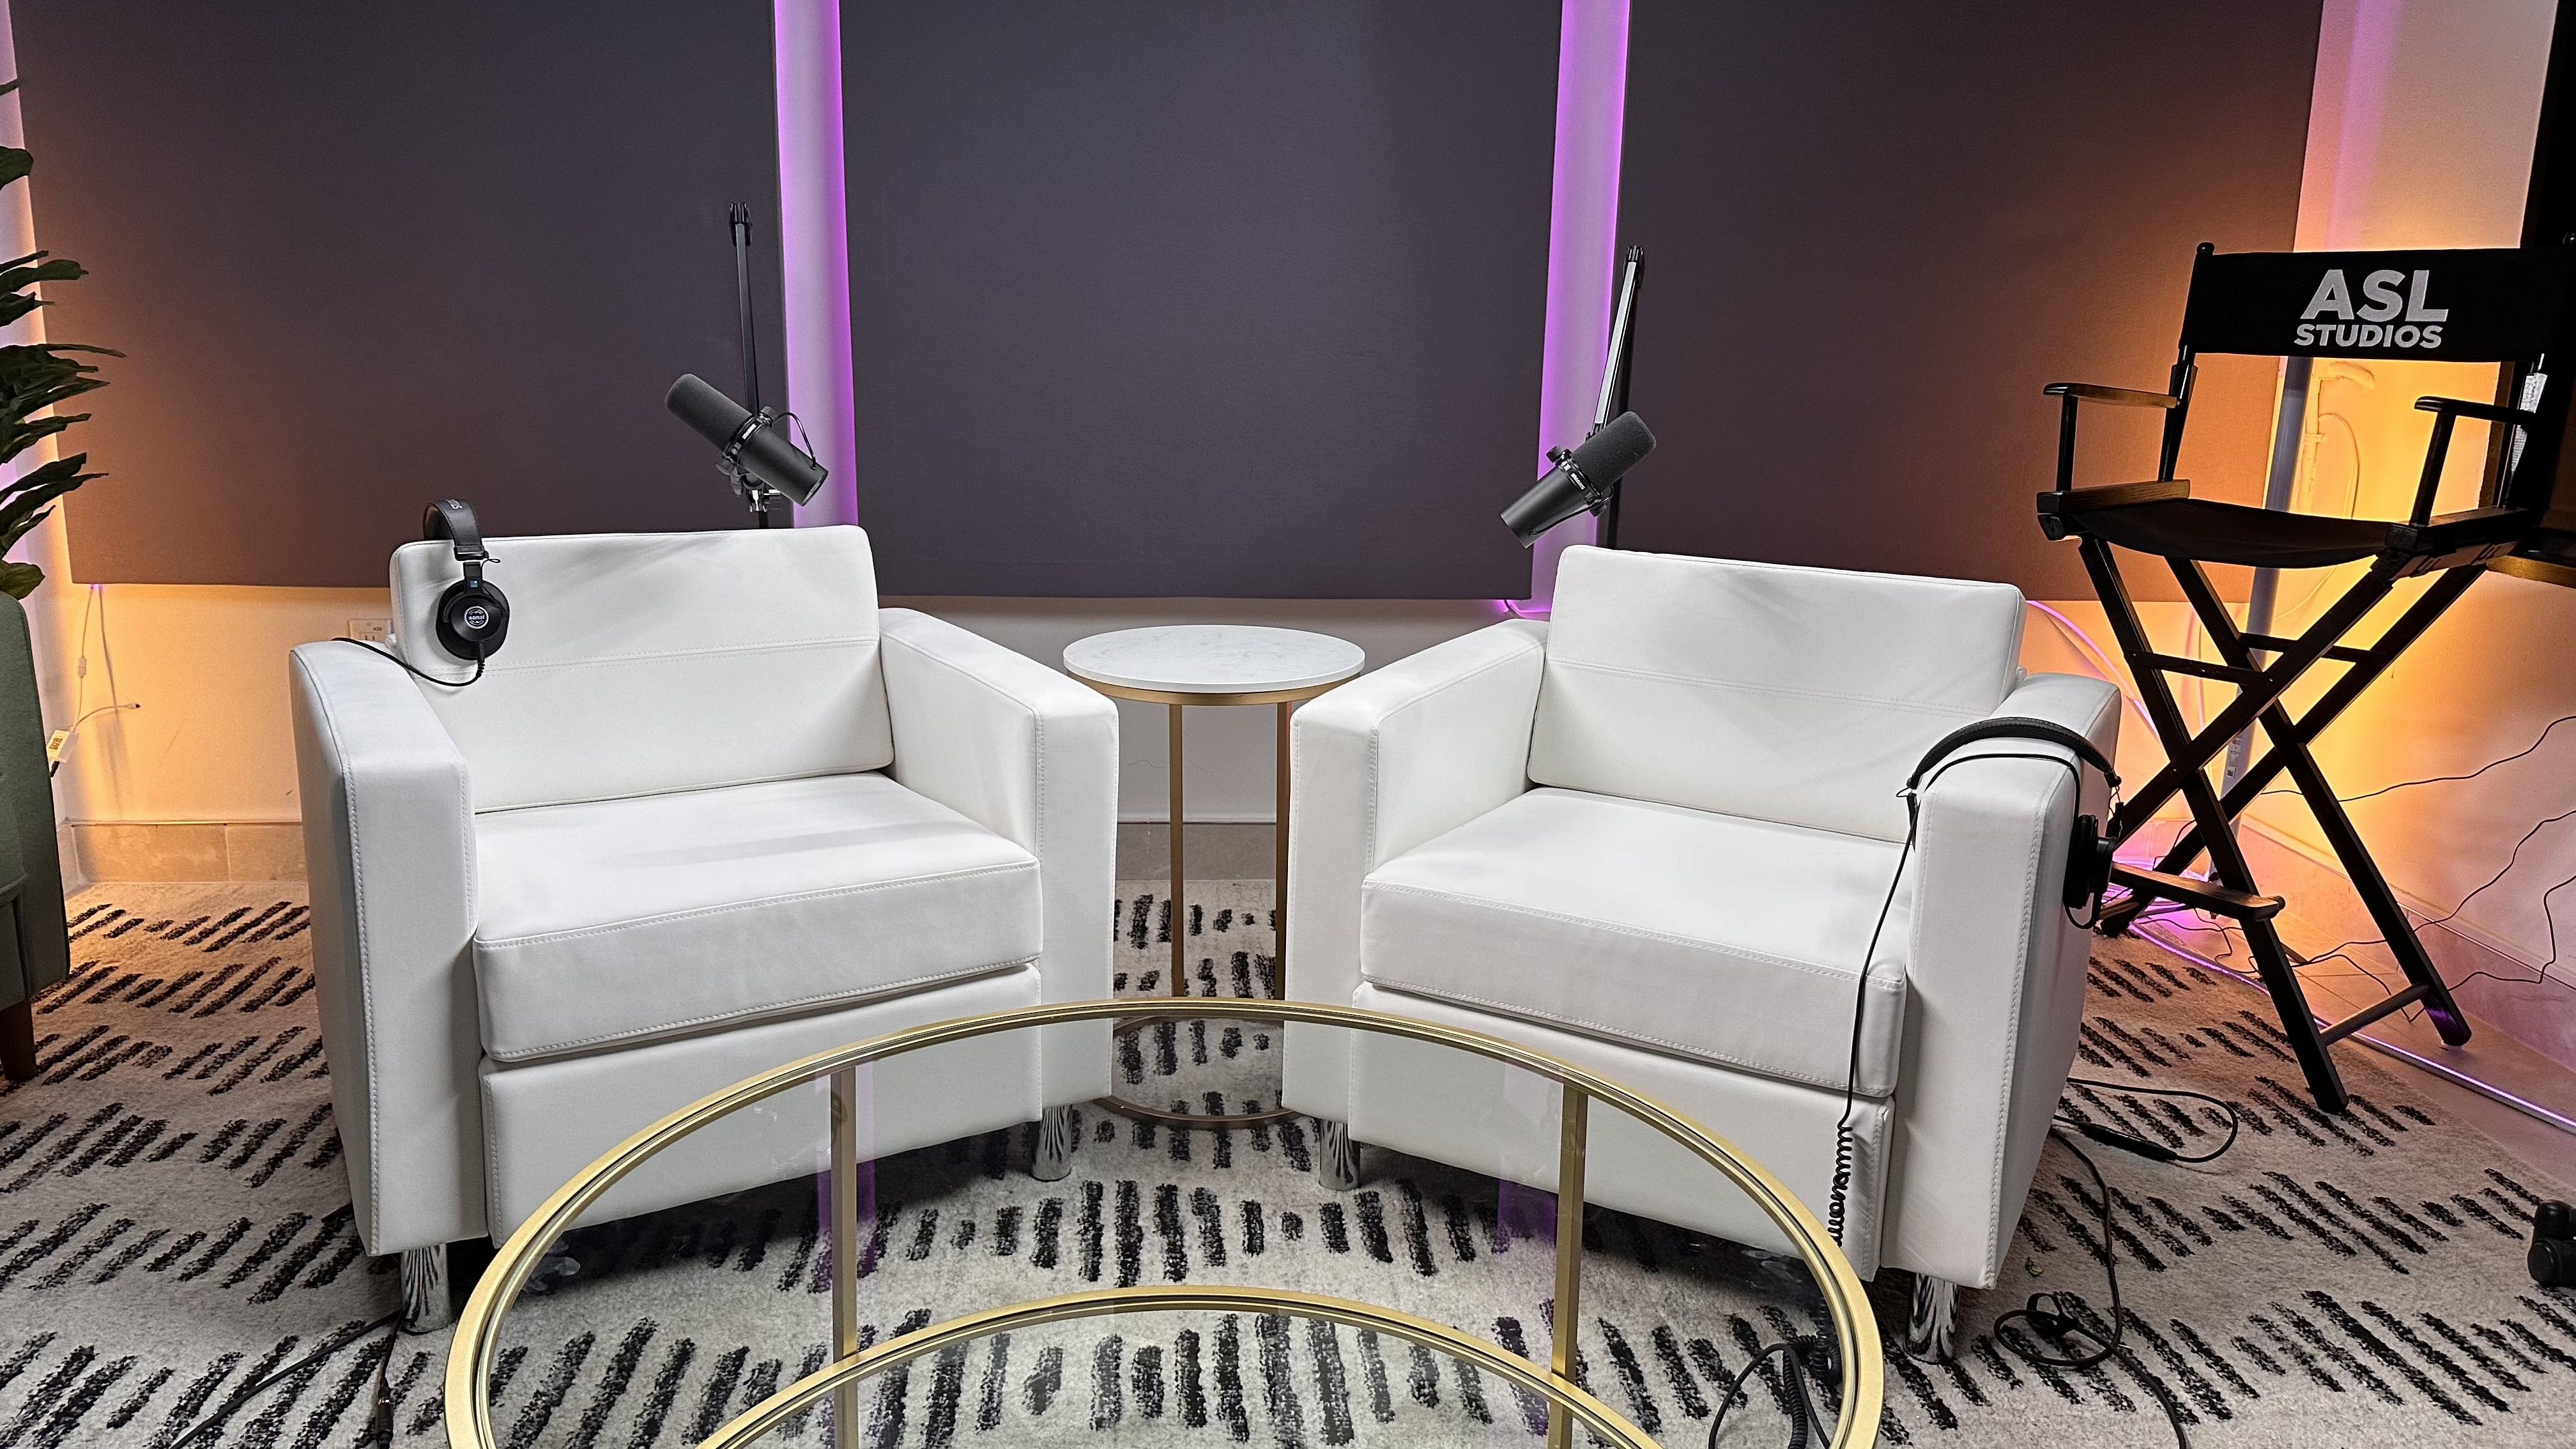 White chairs with purple lighting in background for video podcast at asl studios in nyc